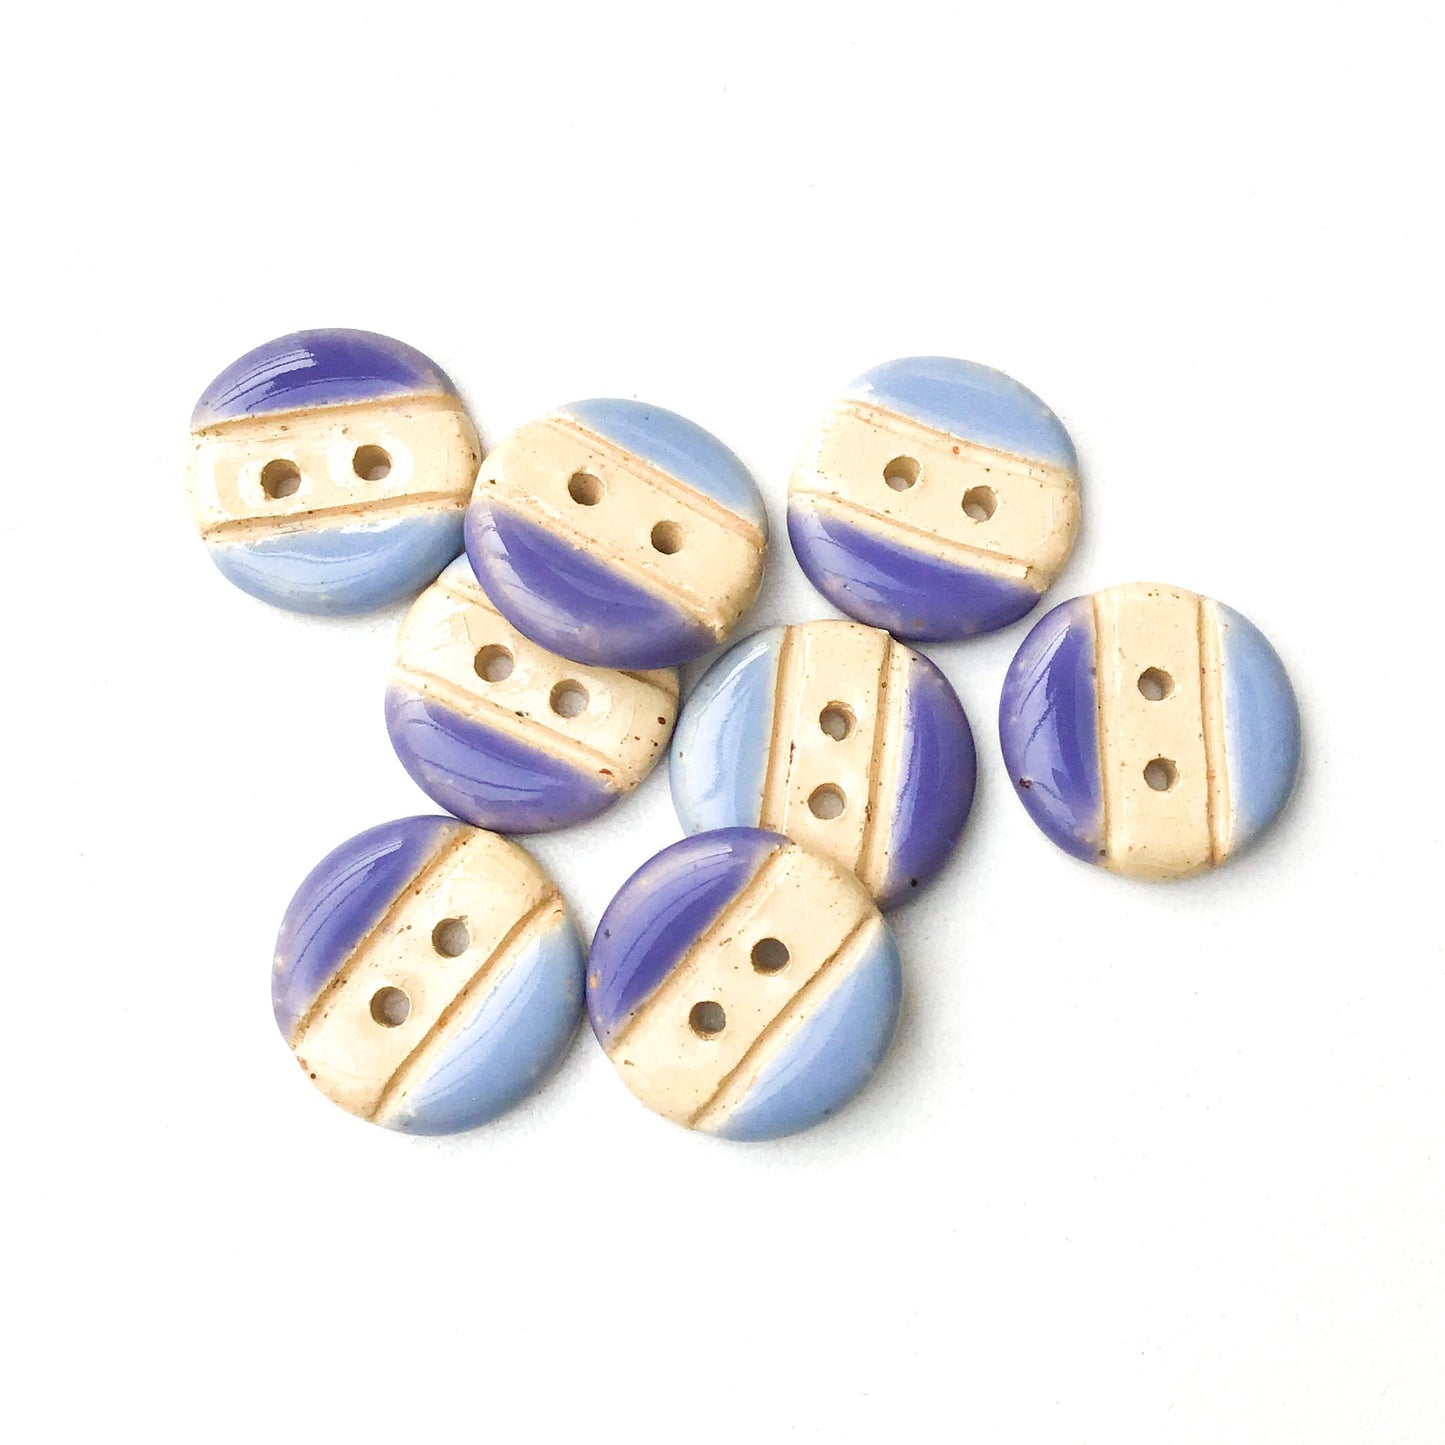 Sky & Purple-Blue Ceramic Buttons on Buff Clay - Round Ceramic Buttons - 11/16" - 8 Pack (ws-192)